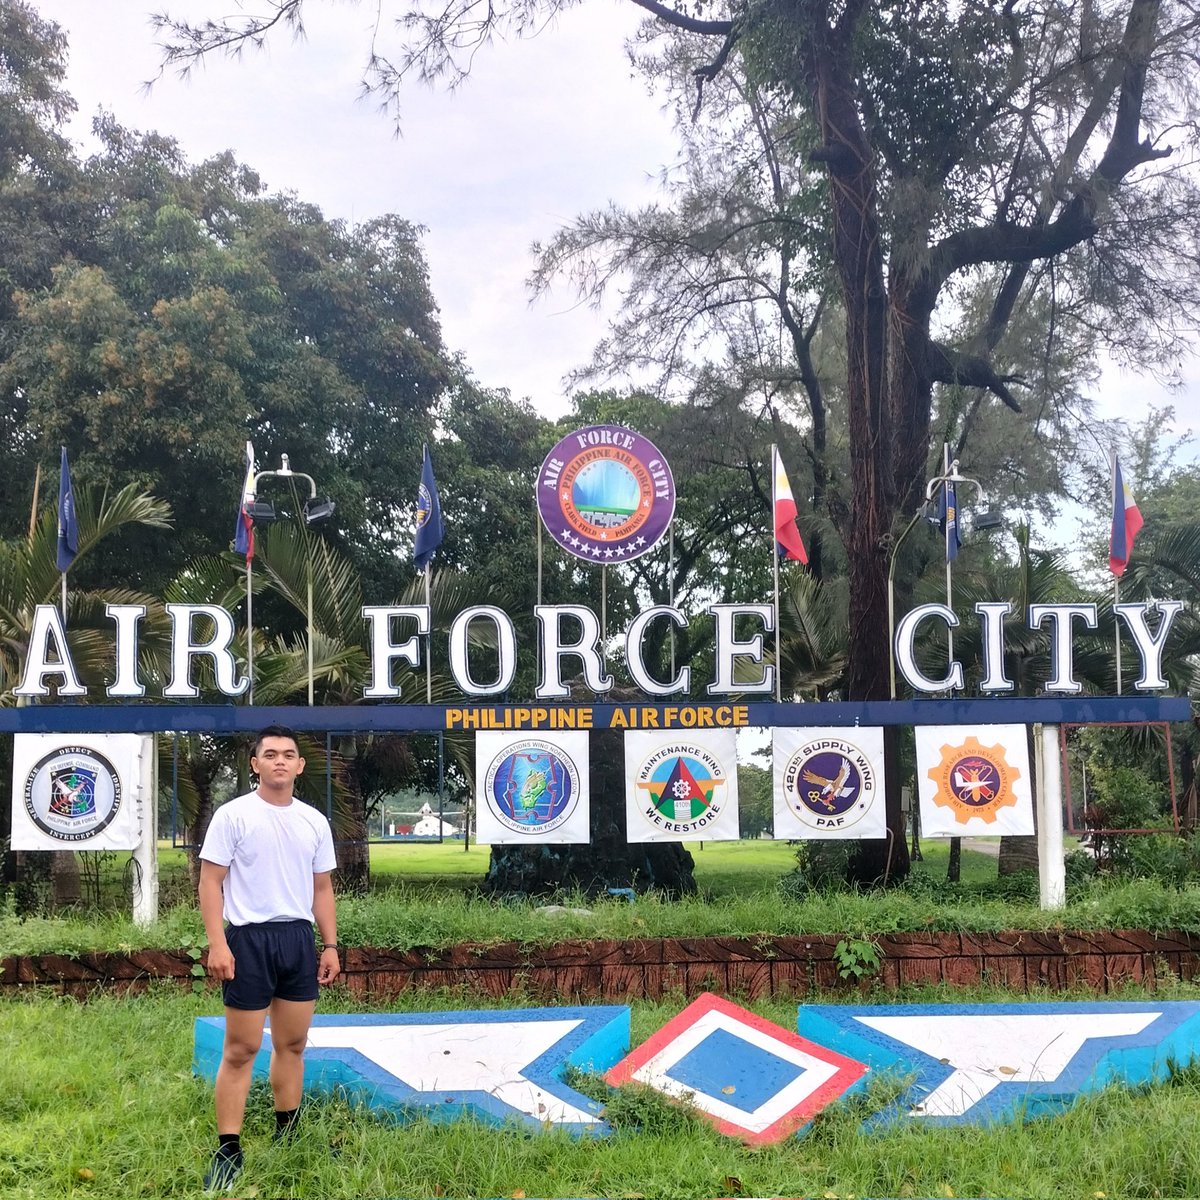 Lord be in my journey.
Sana mapasama sa magMemedical this year for PAF SE Cy 2023

PFT Top Passer cuttie 🙏✨
#AFPyoucantrust #PhilippineAirforce